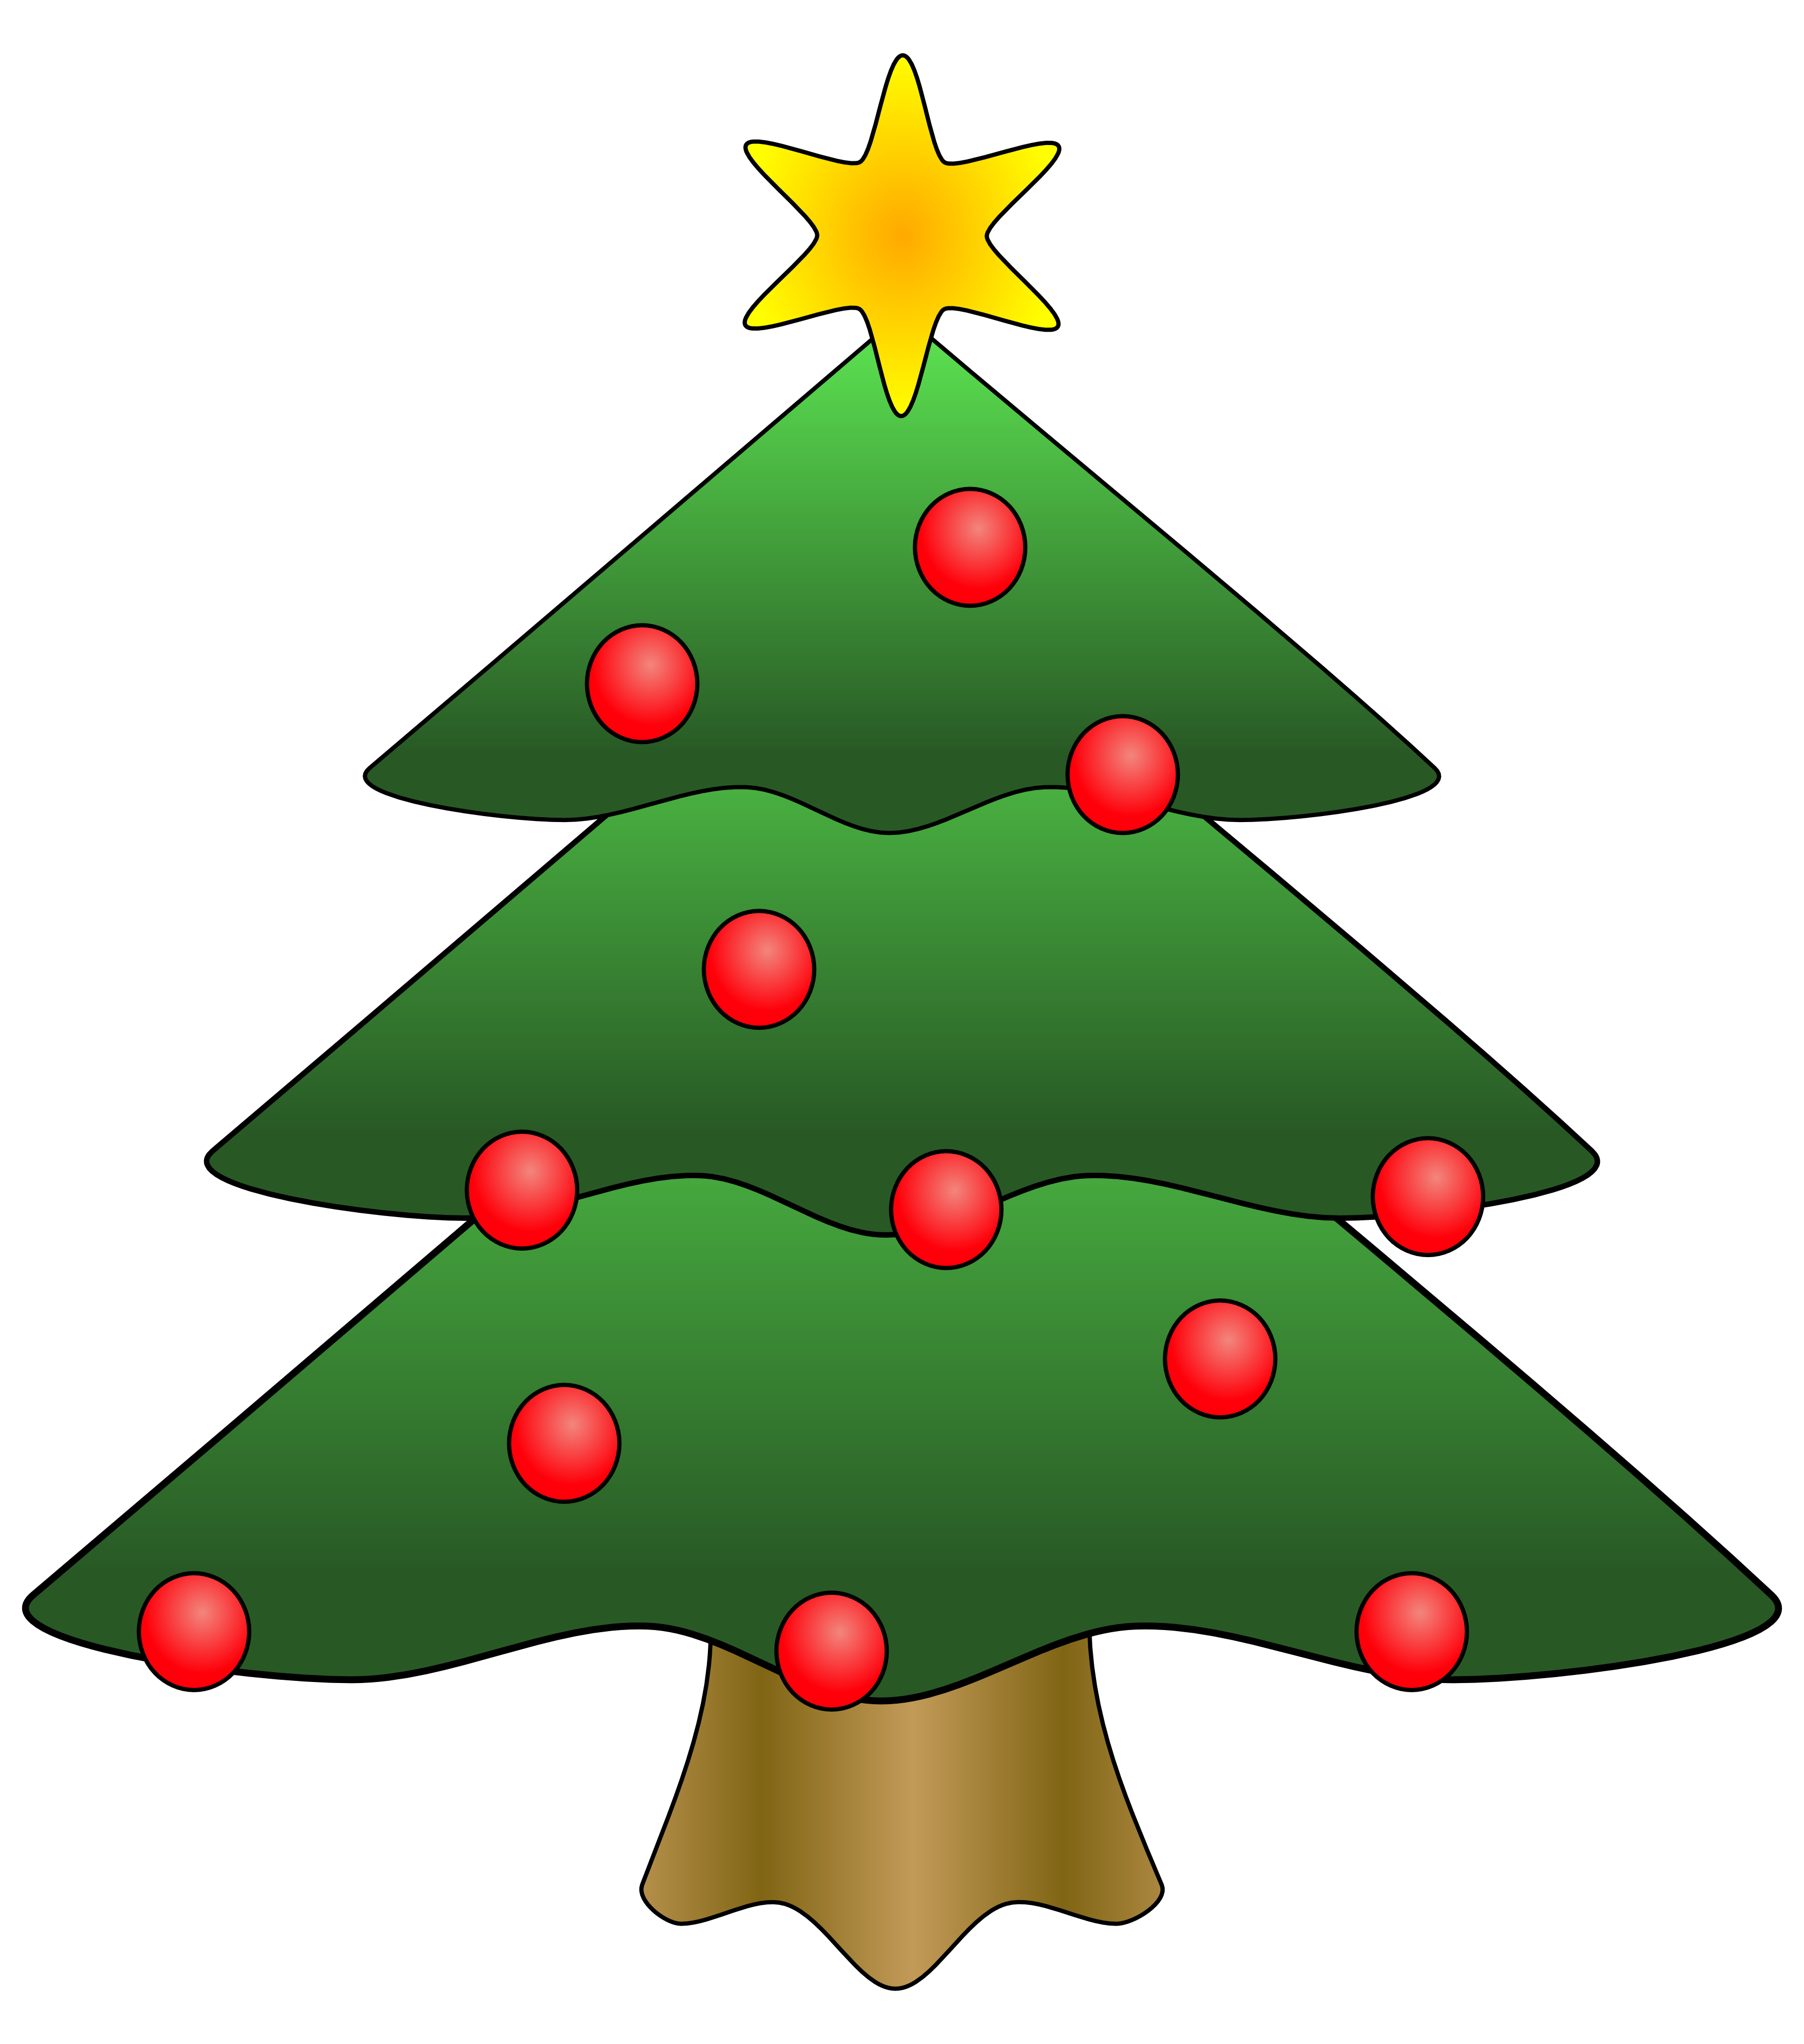 Christmas Tree With Presents Clip Art – Happy Holidays!